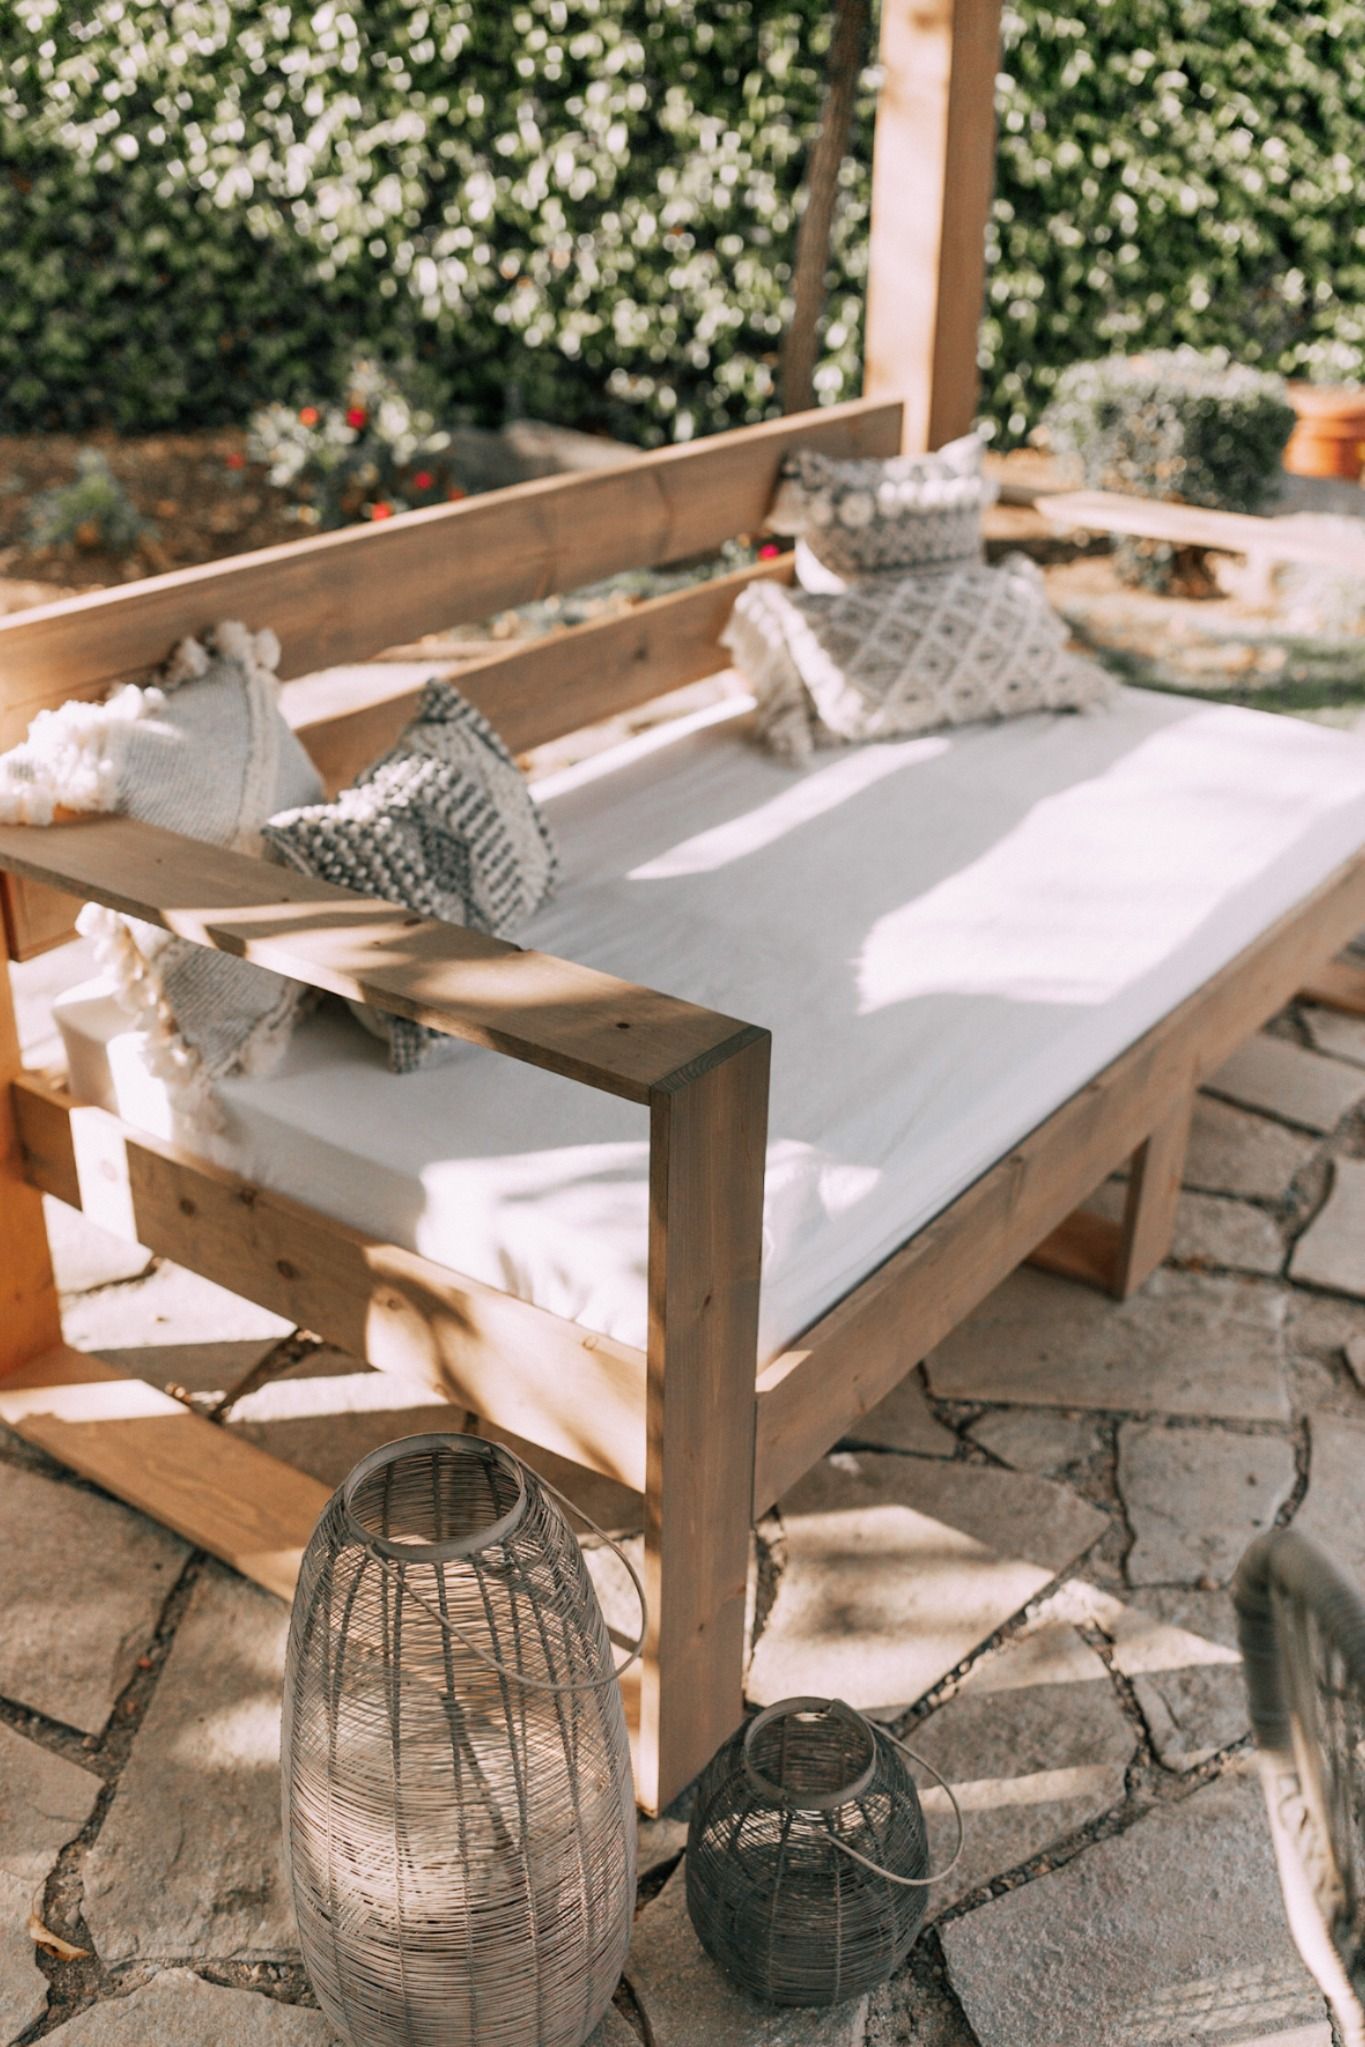 The Ultimate Outdoor Relaxation: The Appeal of a Patio Daybed